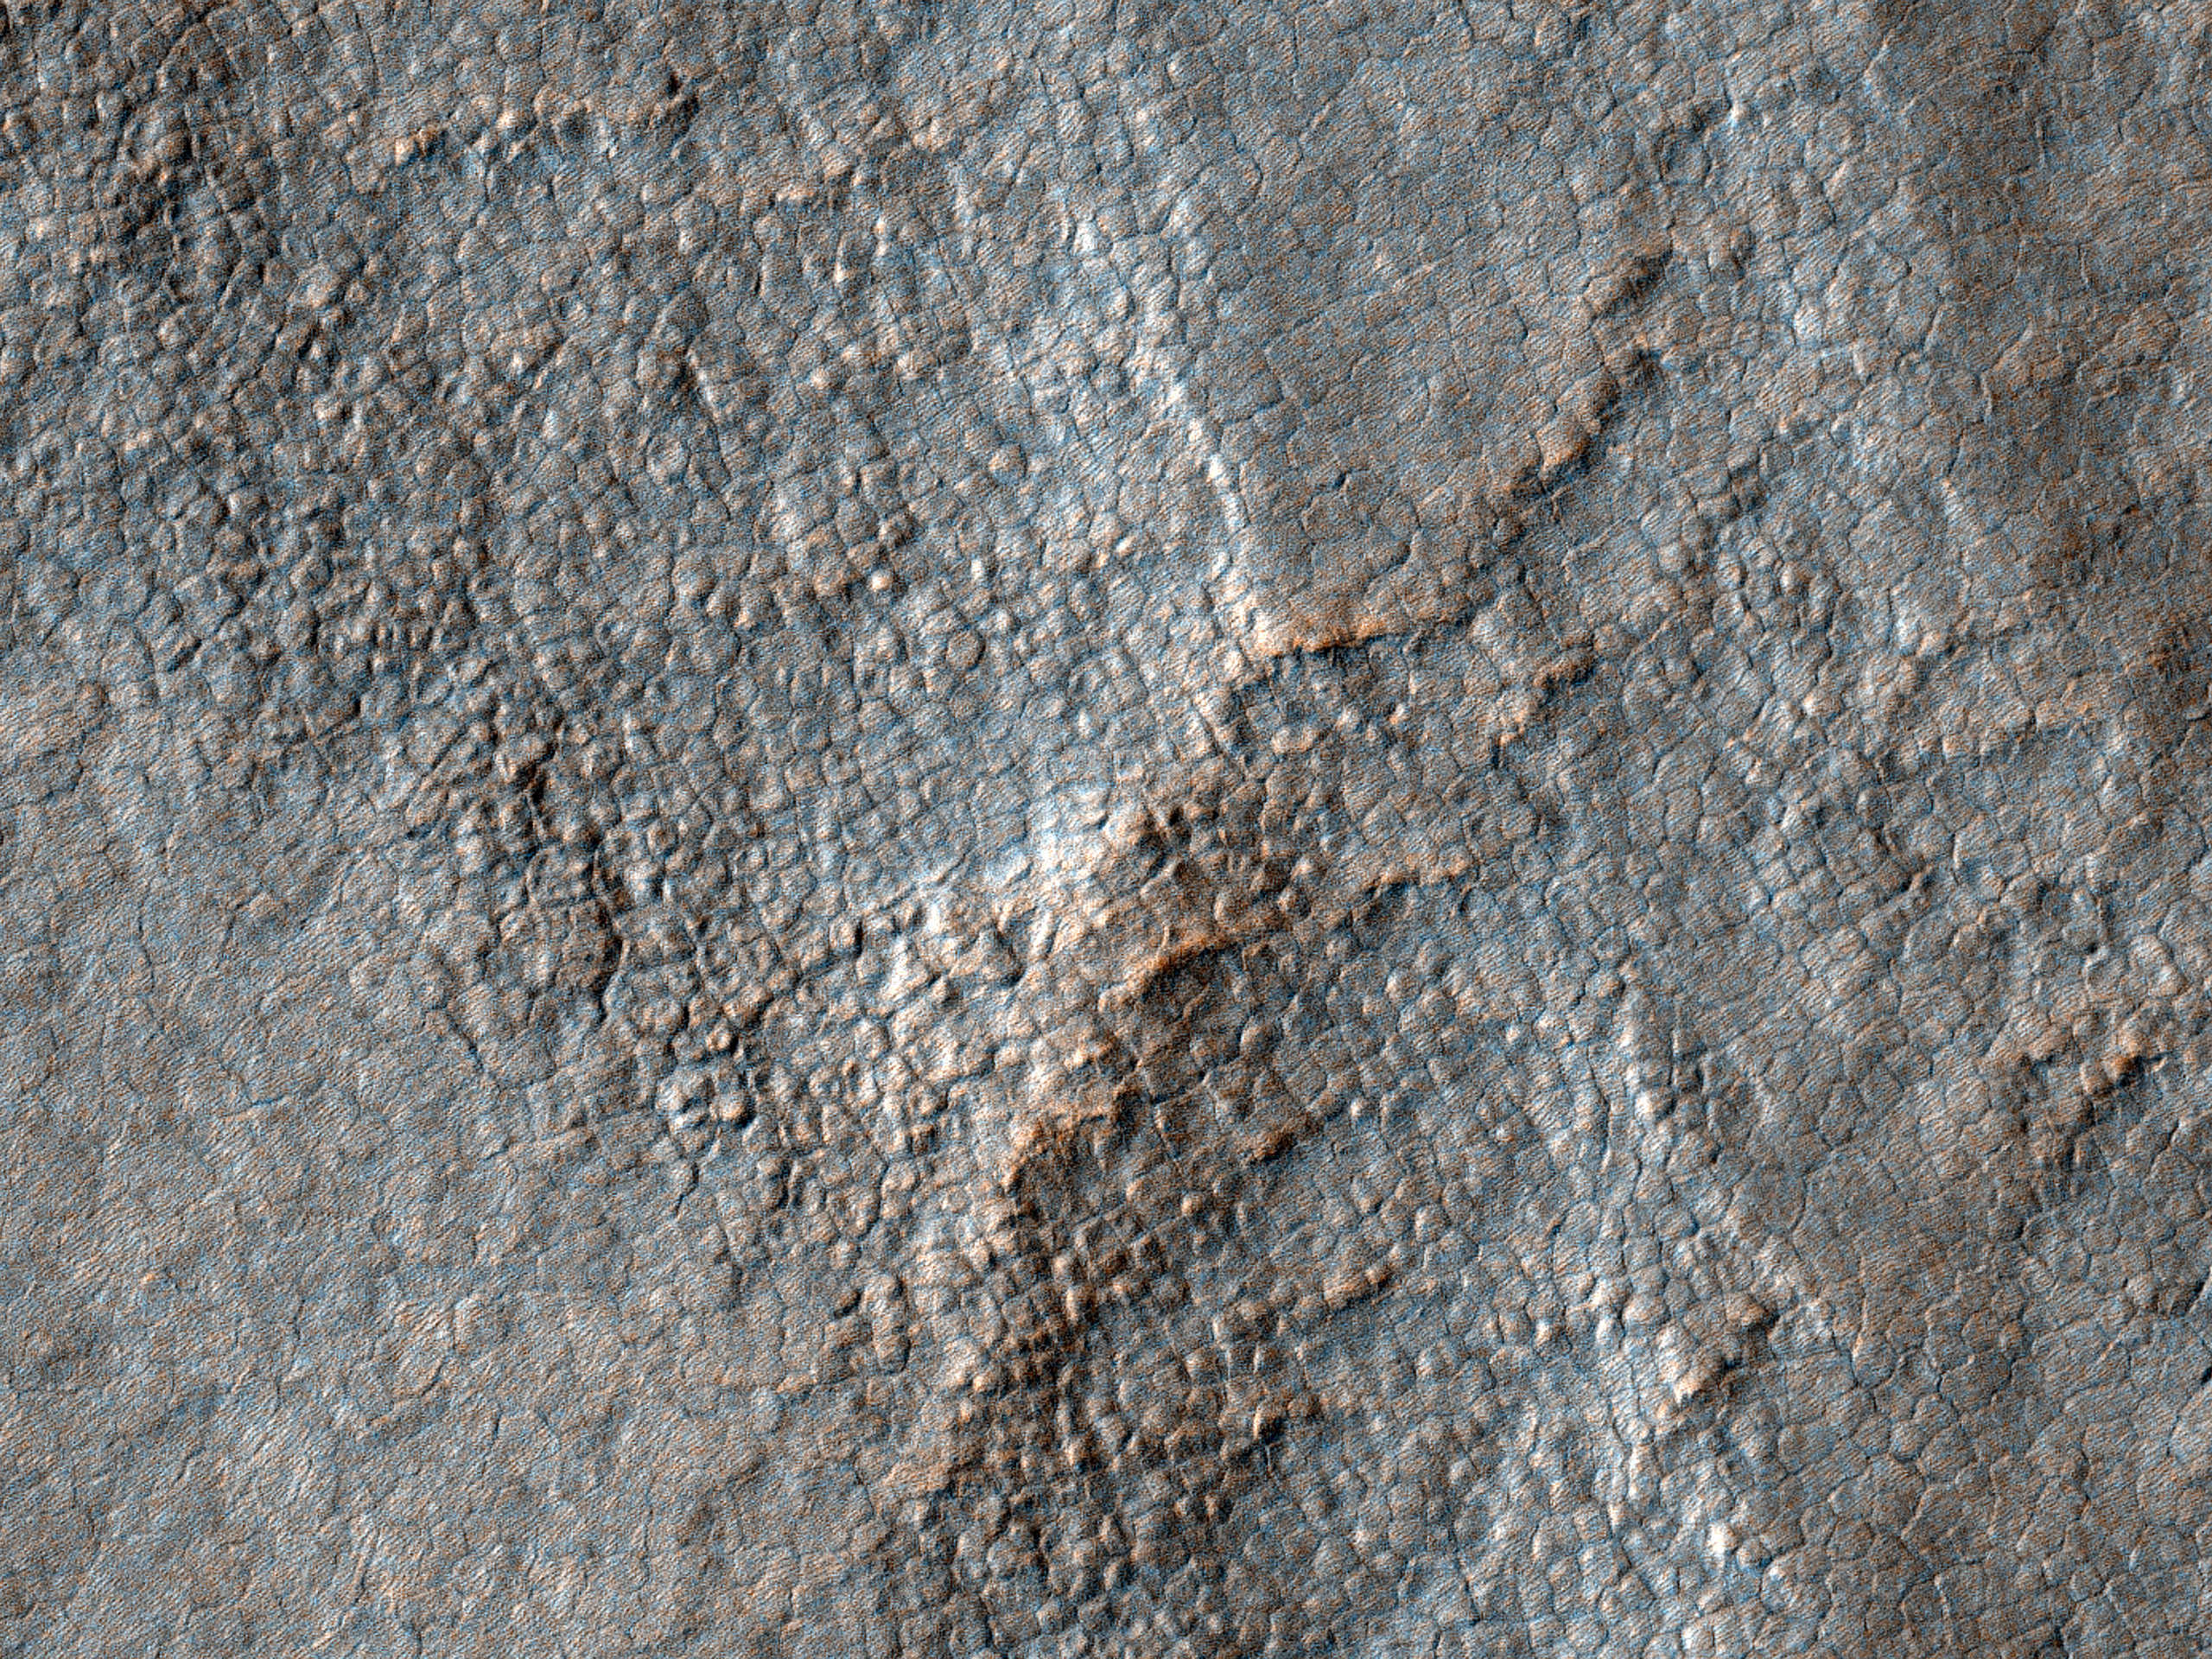 Textured Surface South of Hellas Planitia